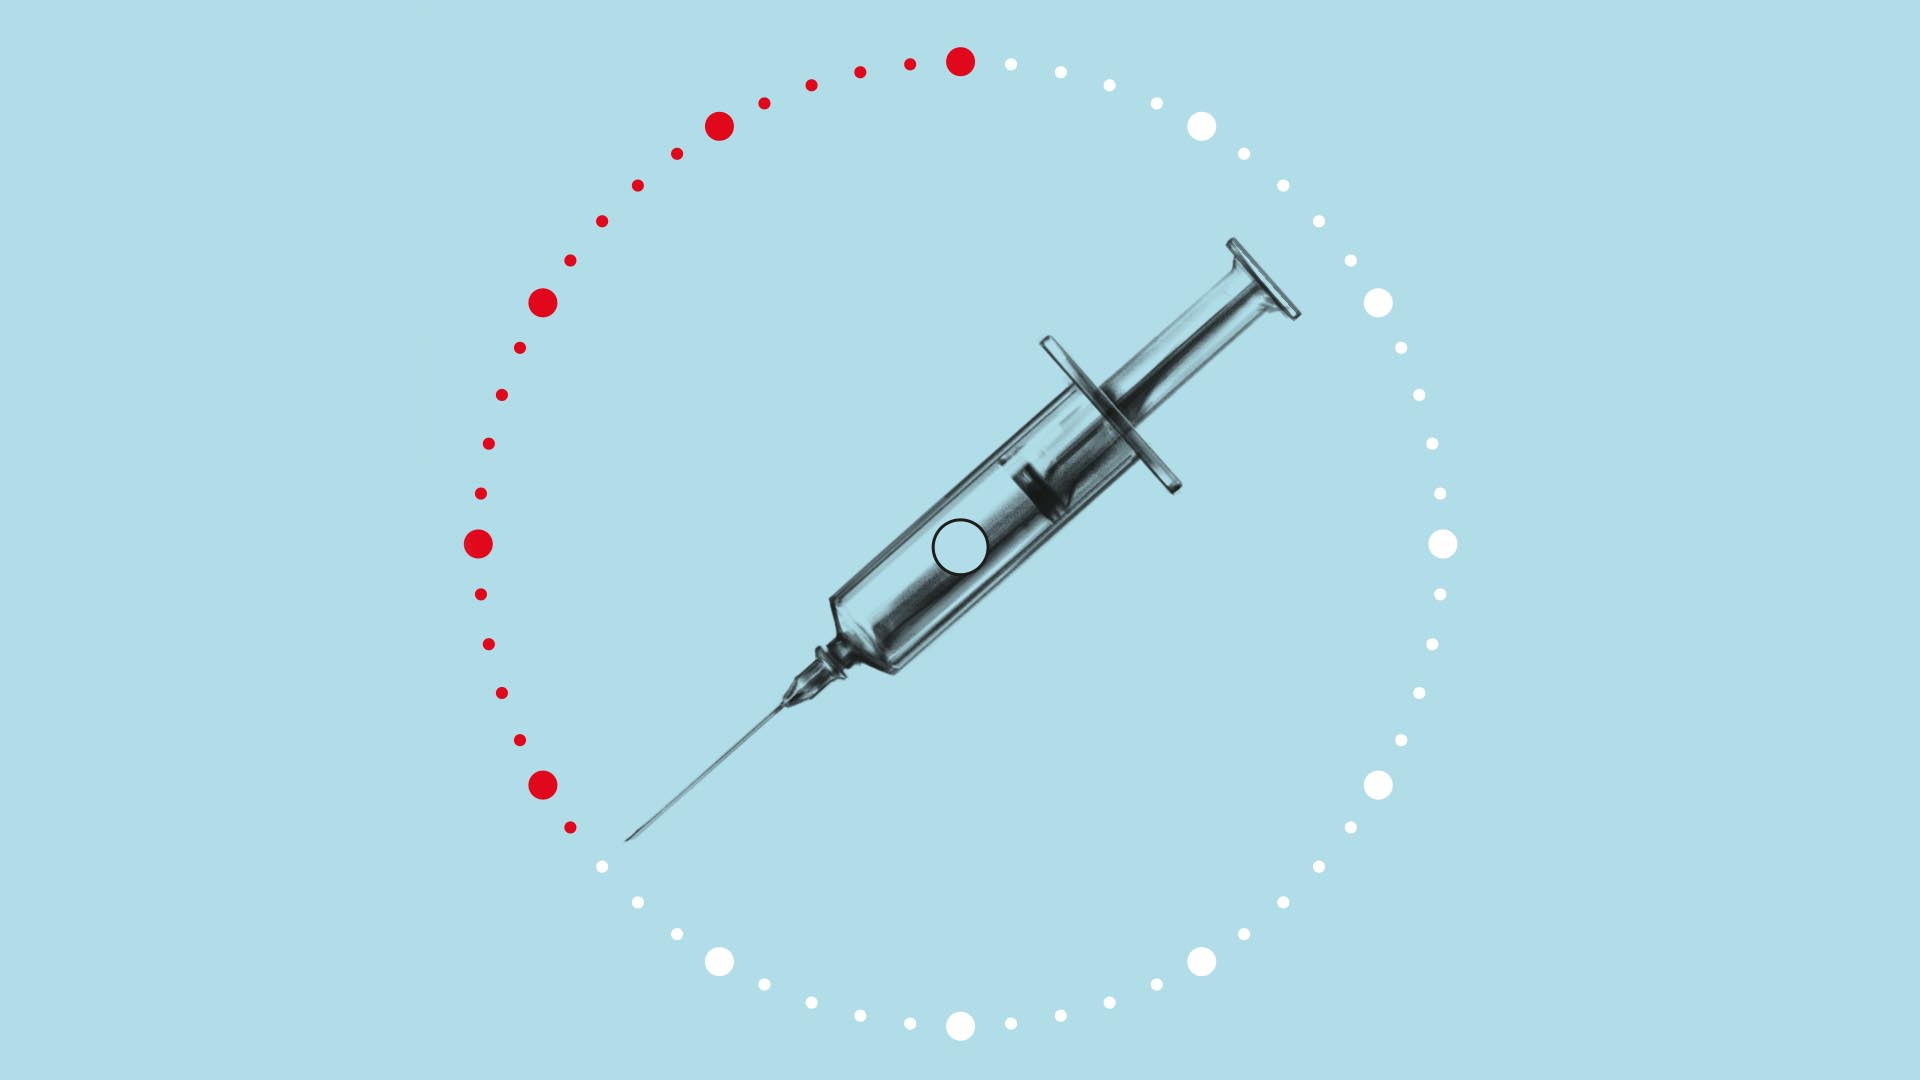 Illustration of a hypodermic needle